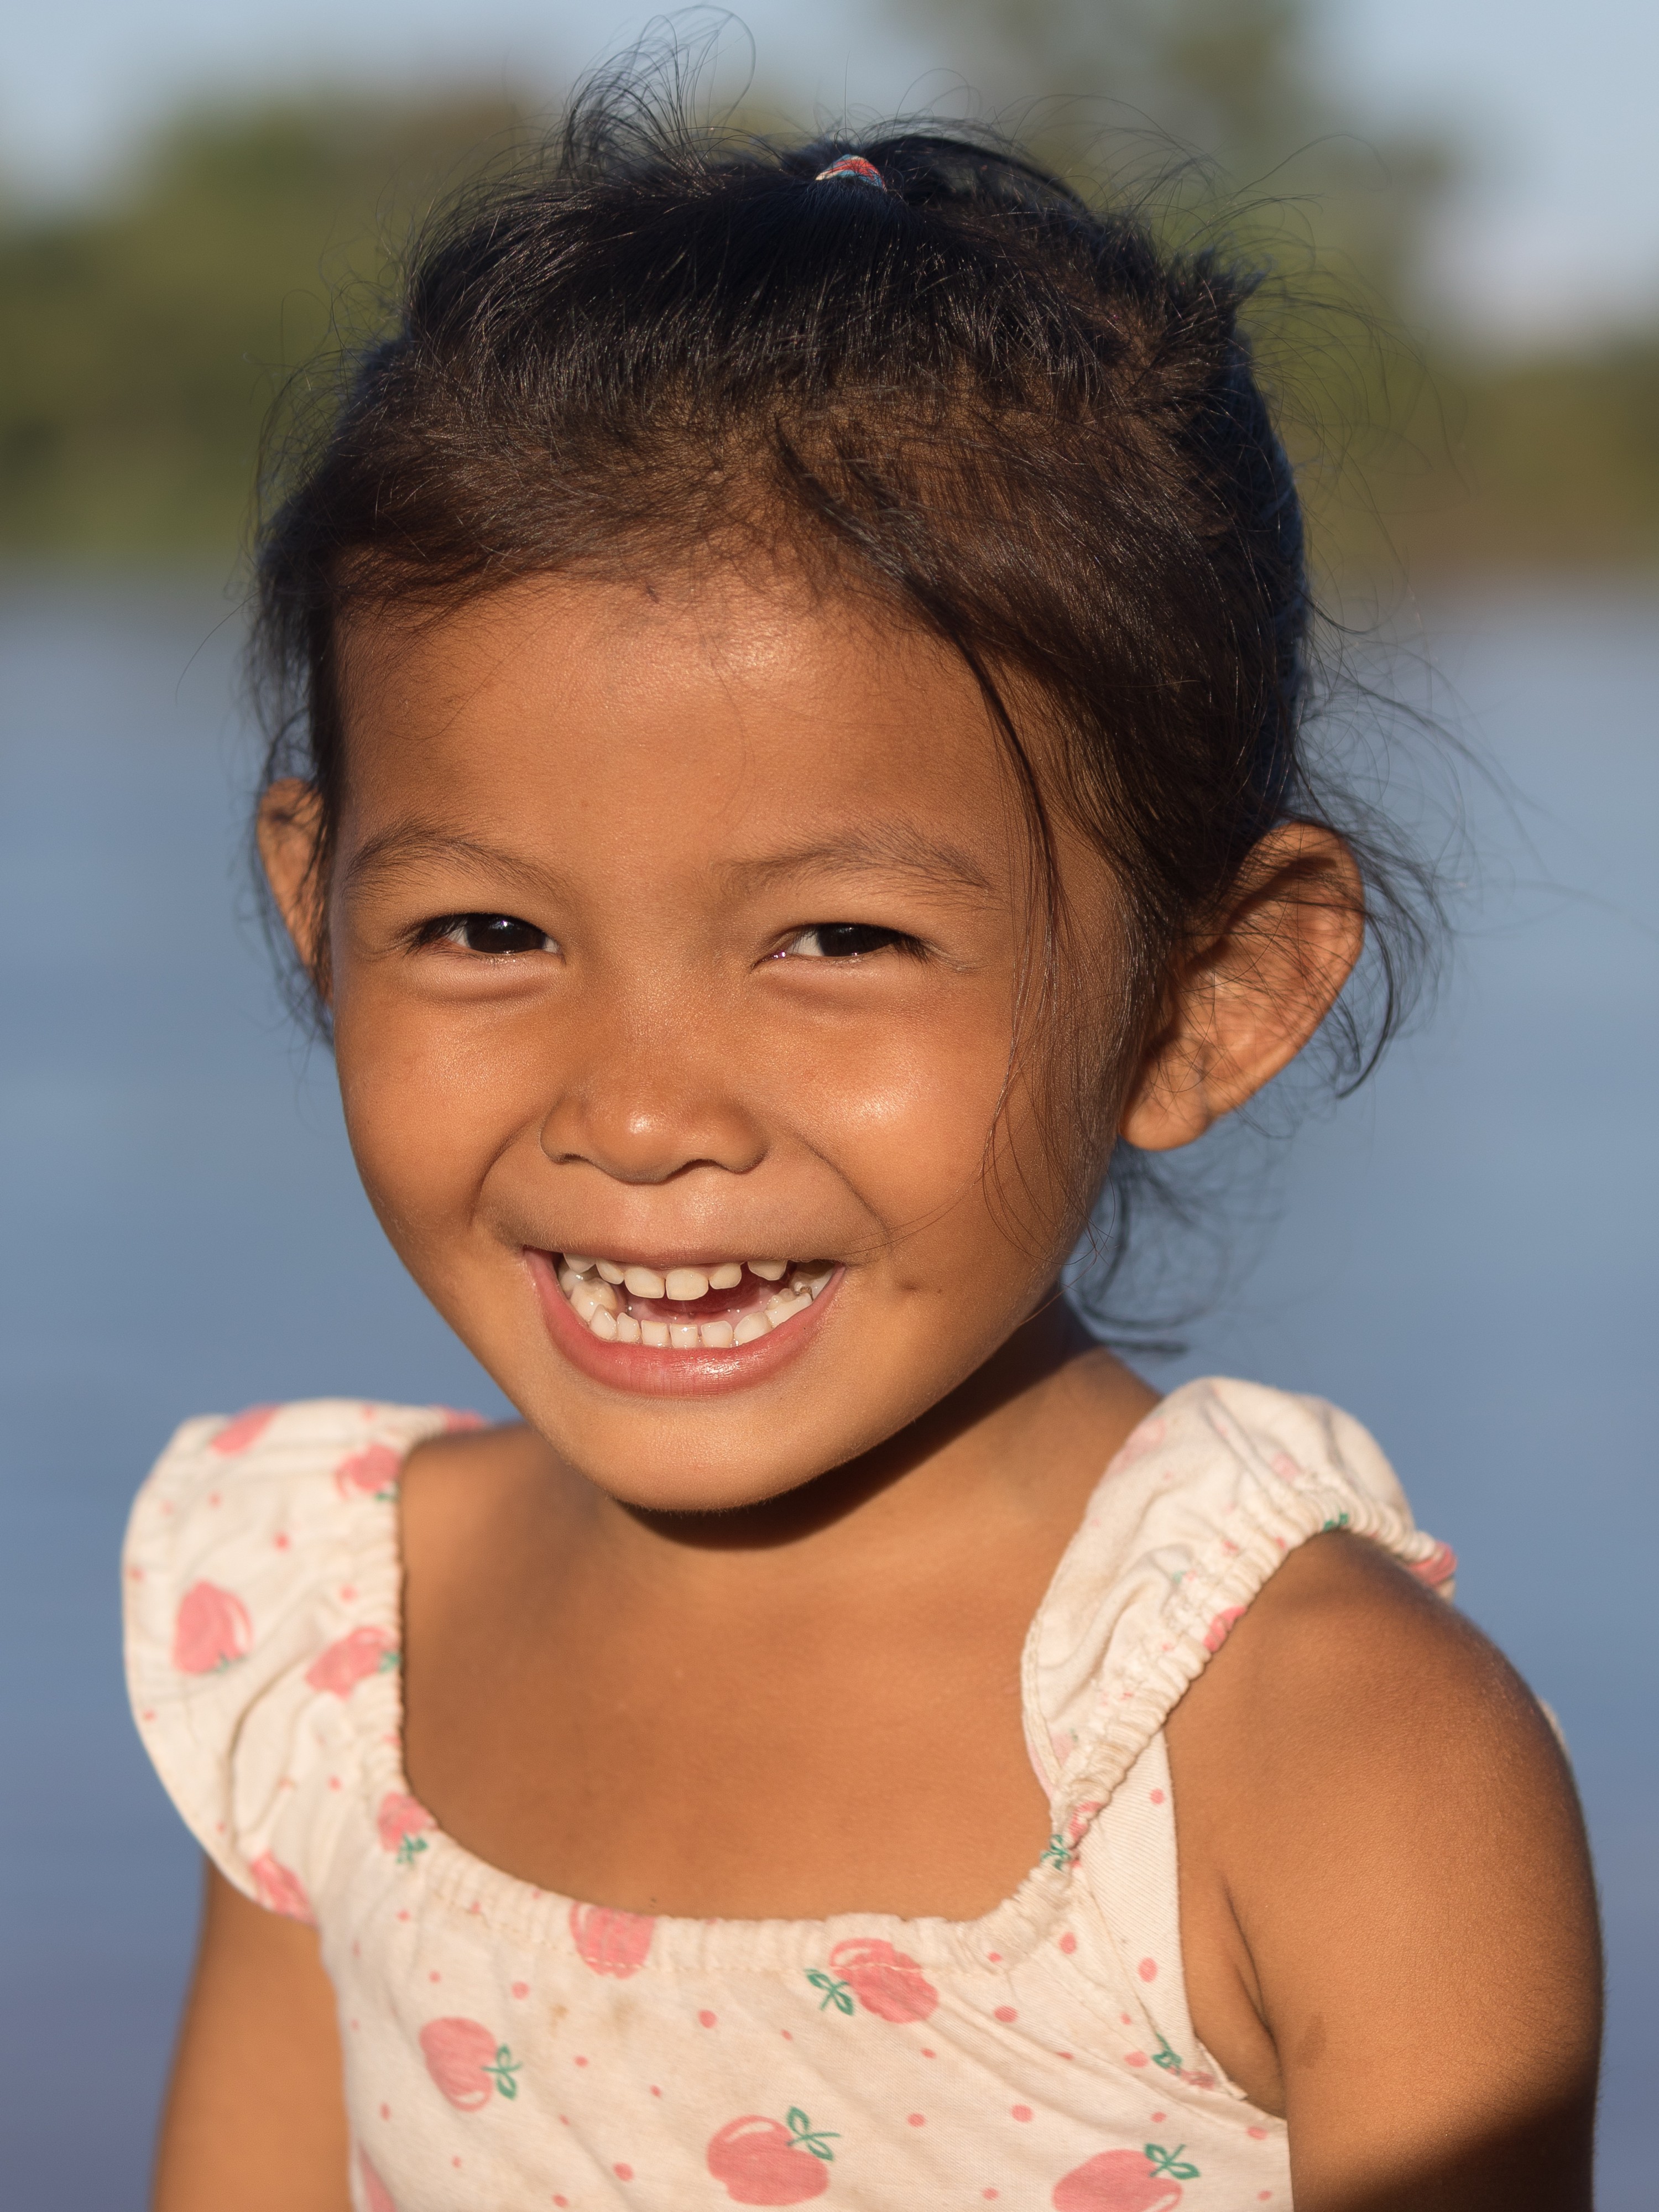 Young girl laughing in sunshine